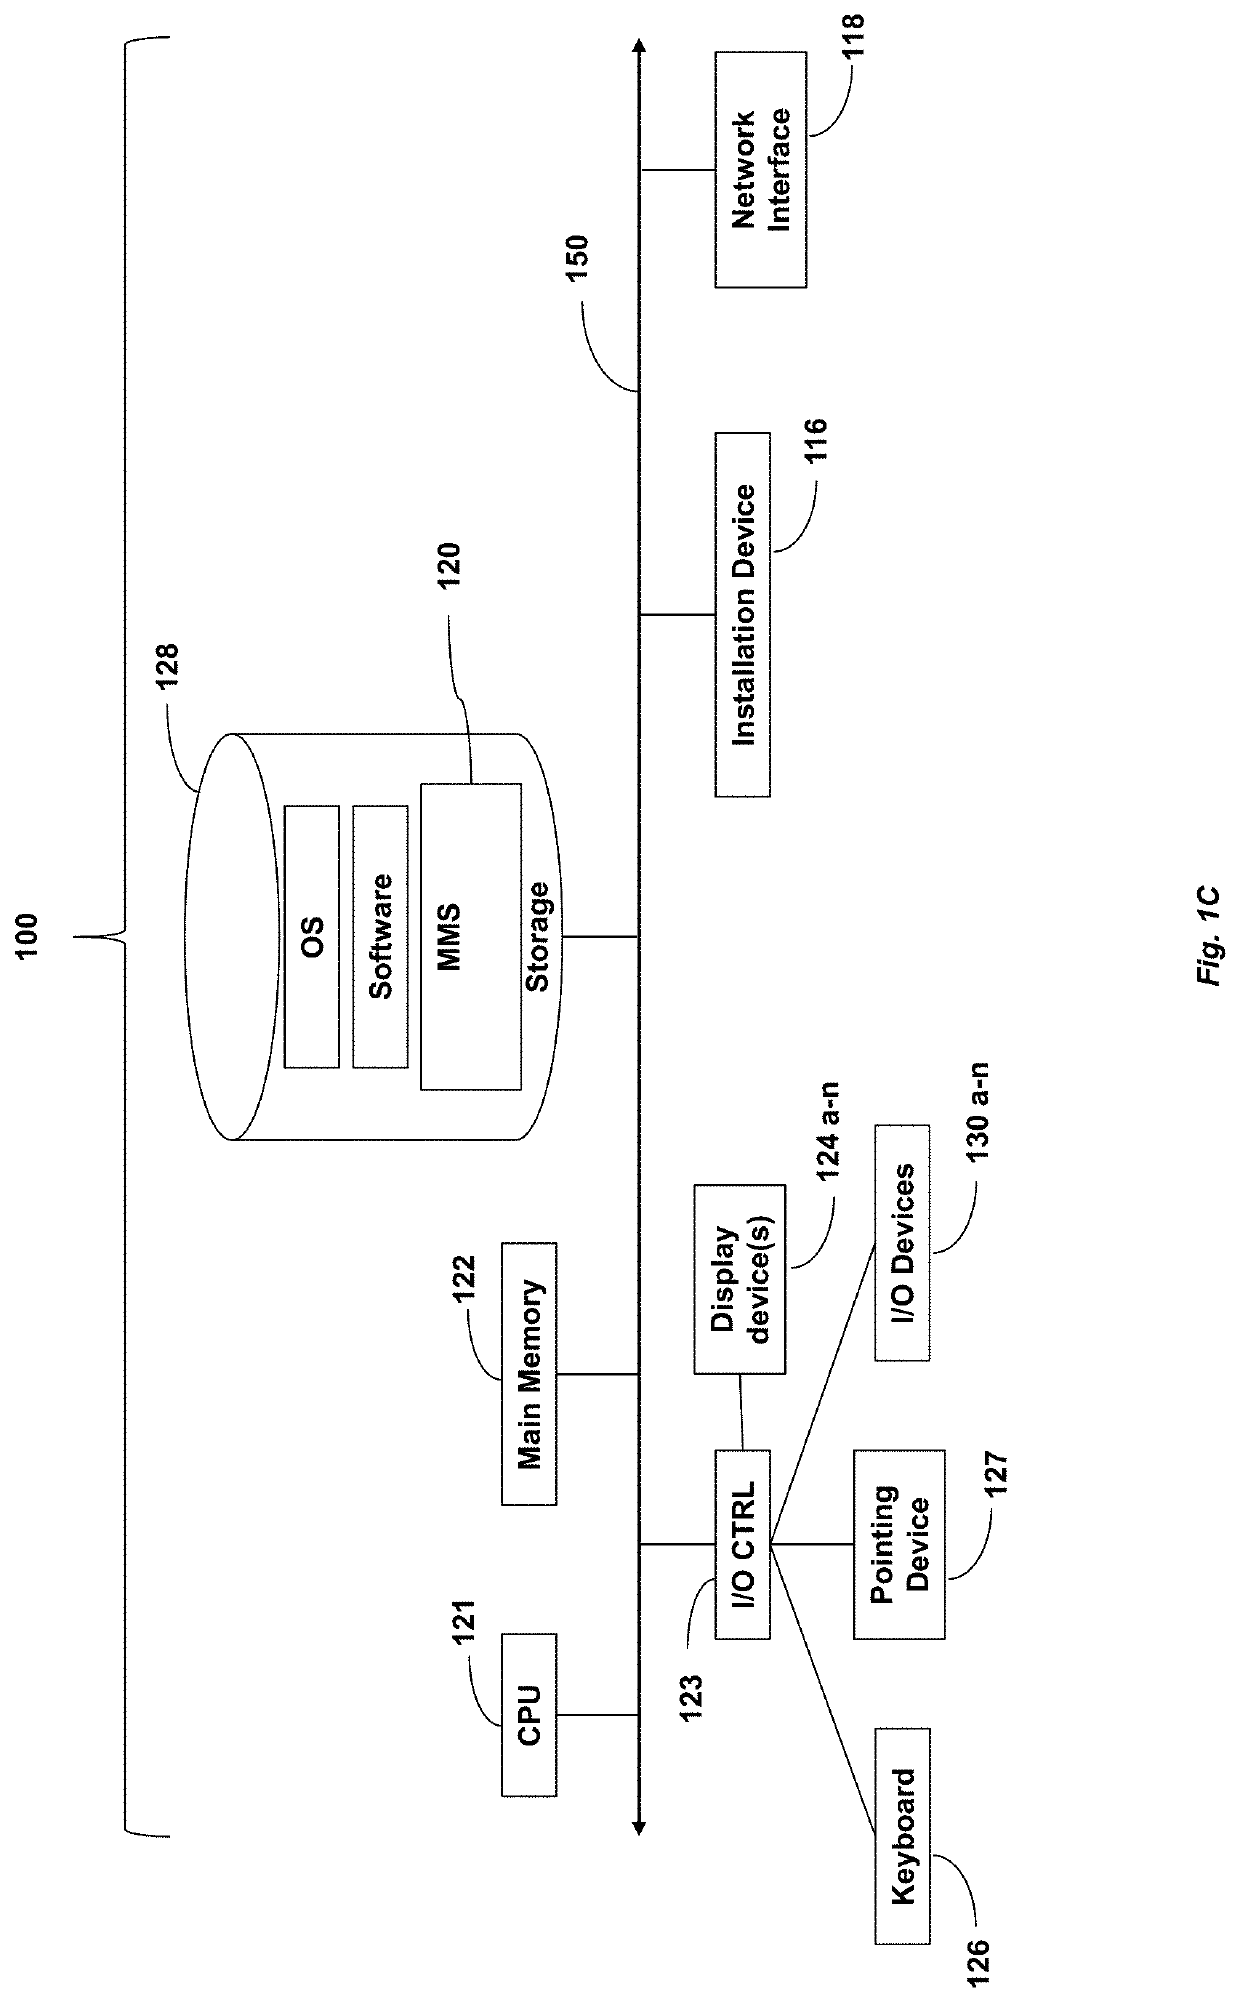 Systems and methods for intelligent vaporizers